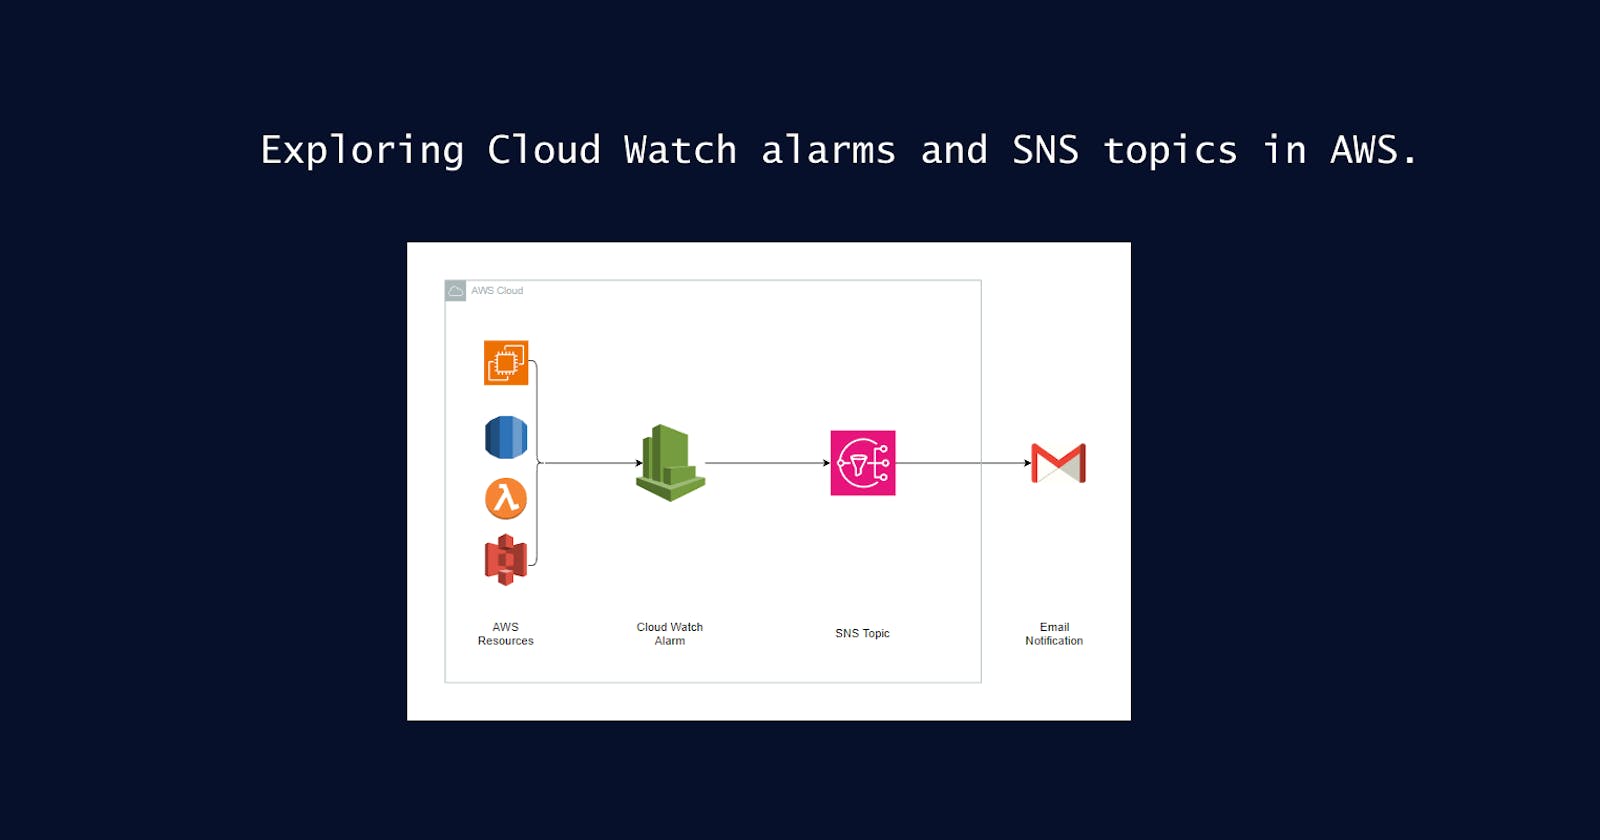 Exploring Cloud Watch alarms and SNS topics in AWS.